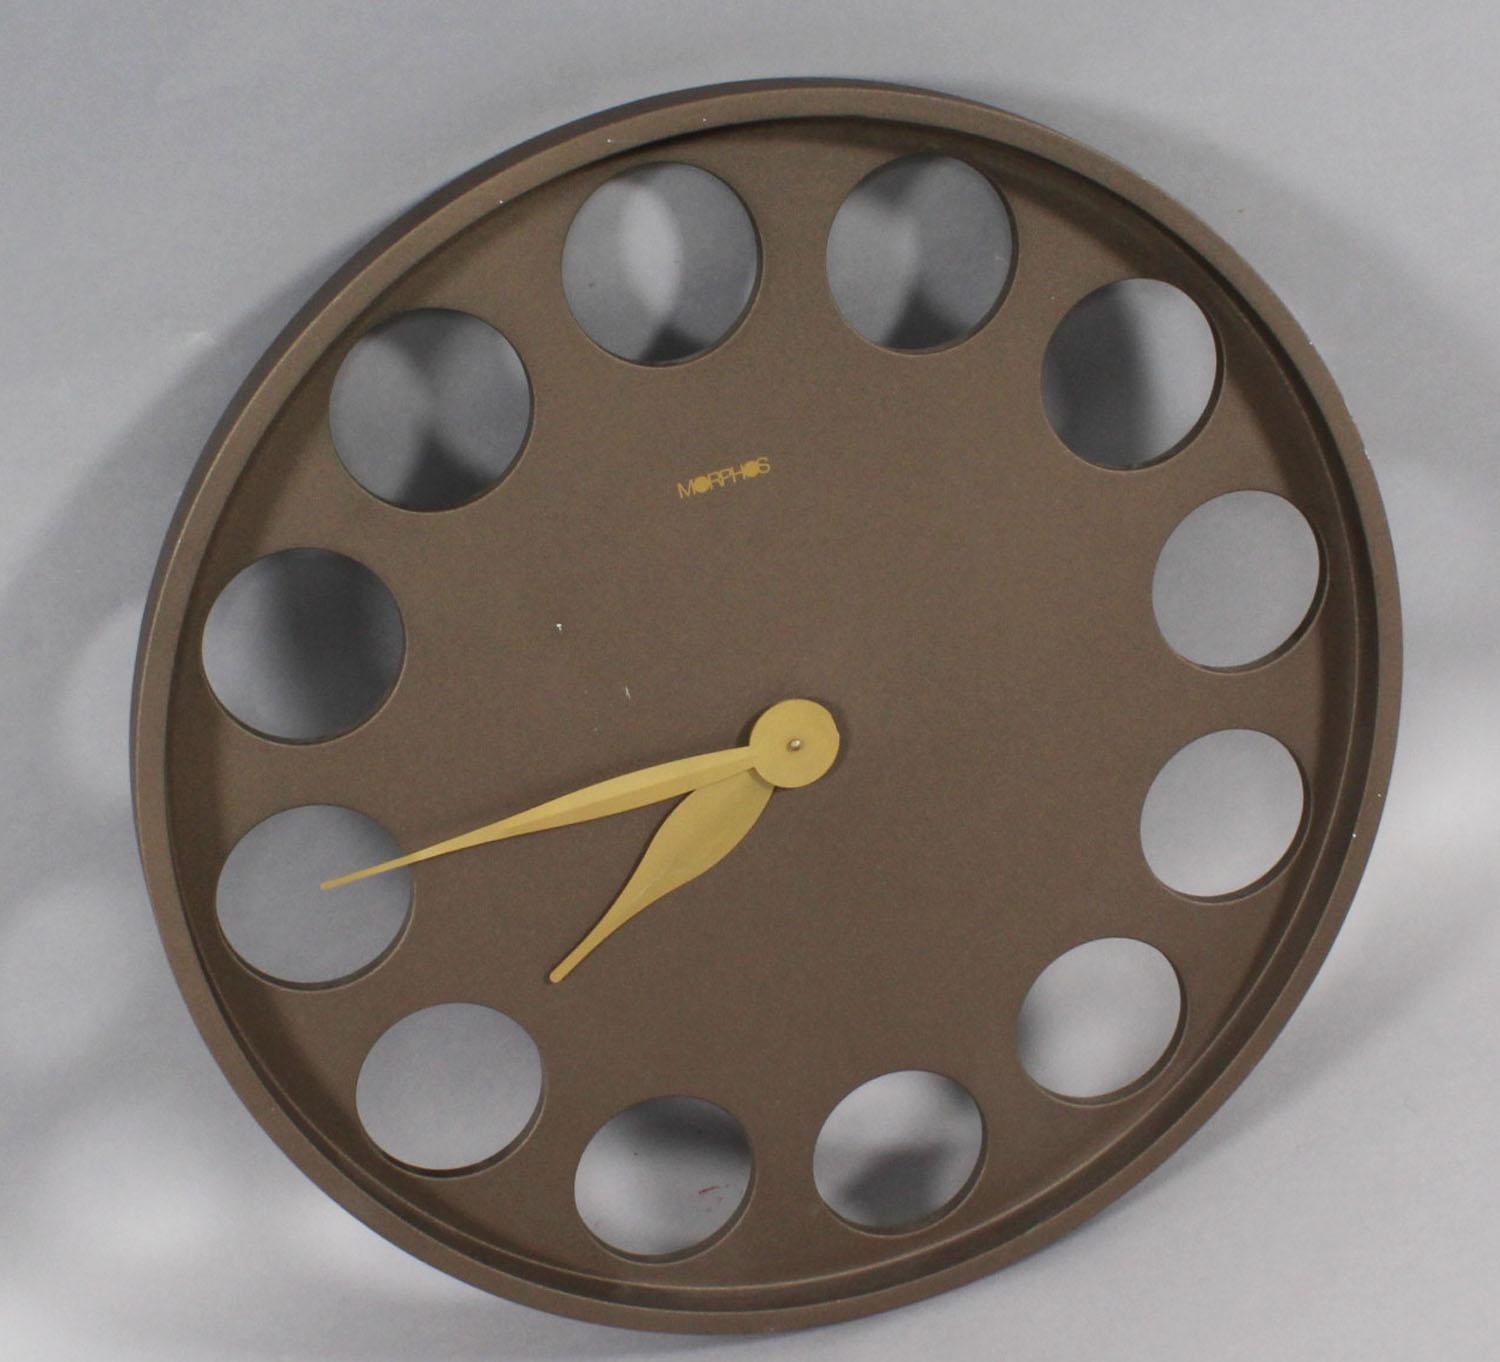 Maurizio Dupanti for Morphos. Large plastic wall clock fitted with a battery movement. Measures: Ø 70 cm.